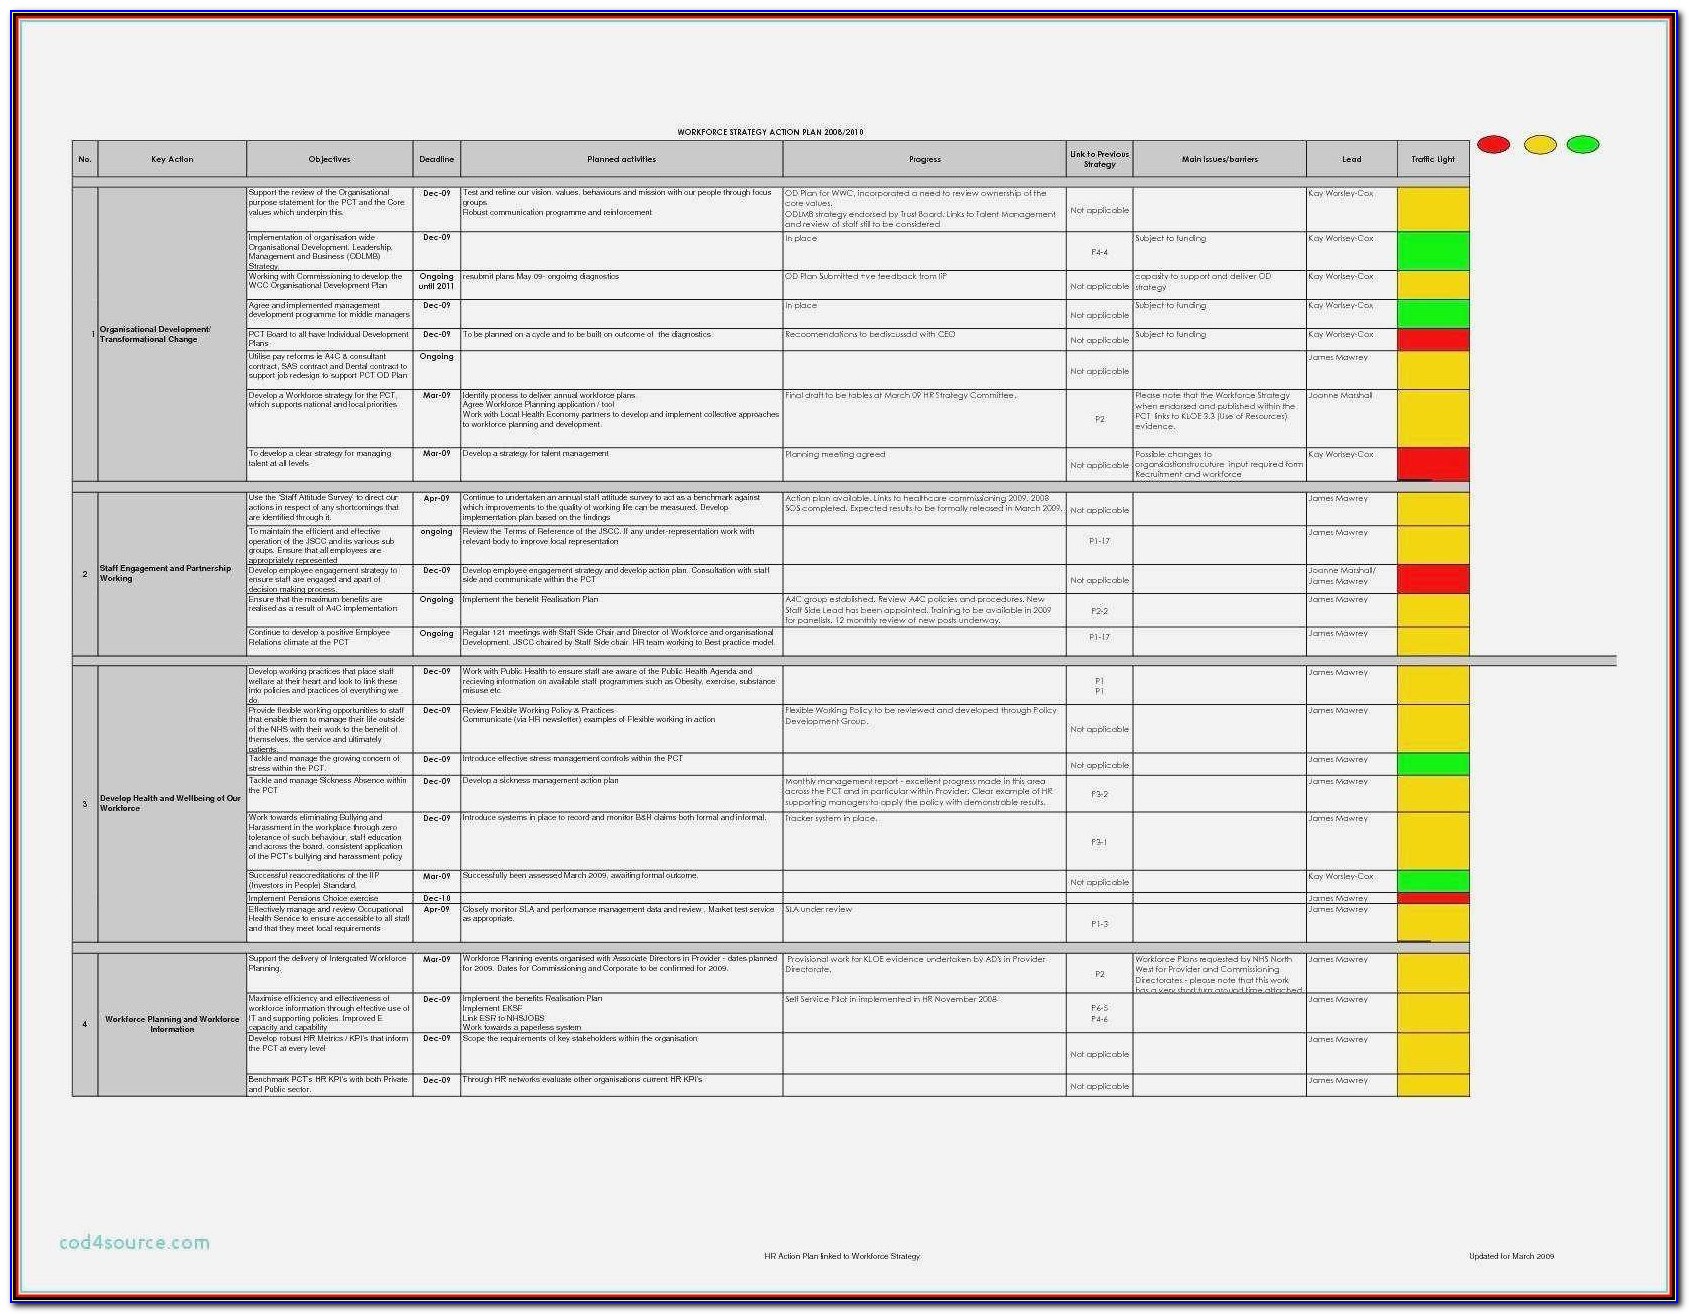 Cyber Security Risk Assessment Report Sample